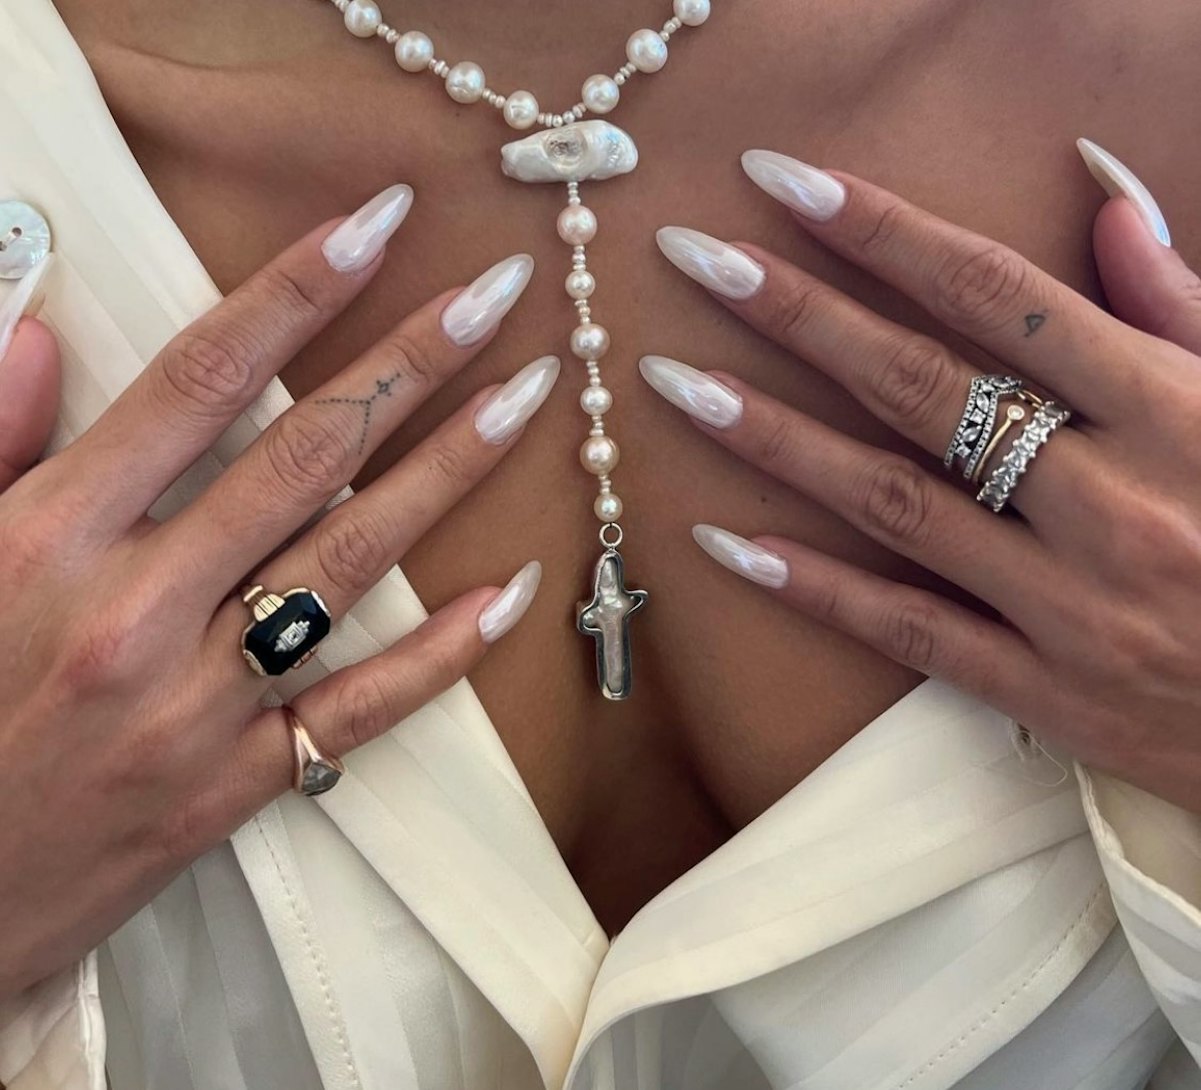 Hailey Bieber's Red Nail Color at the 2019 Met Gala - wide 9